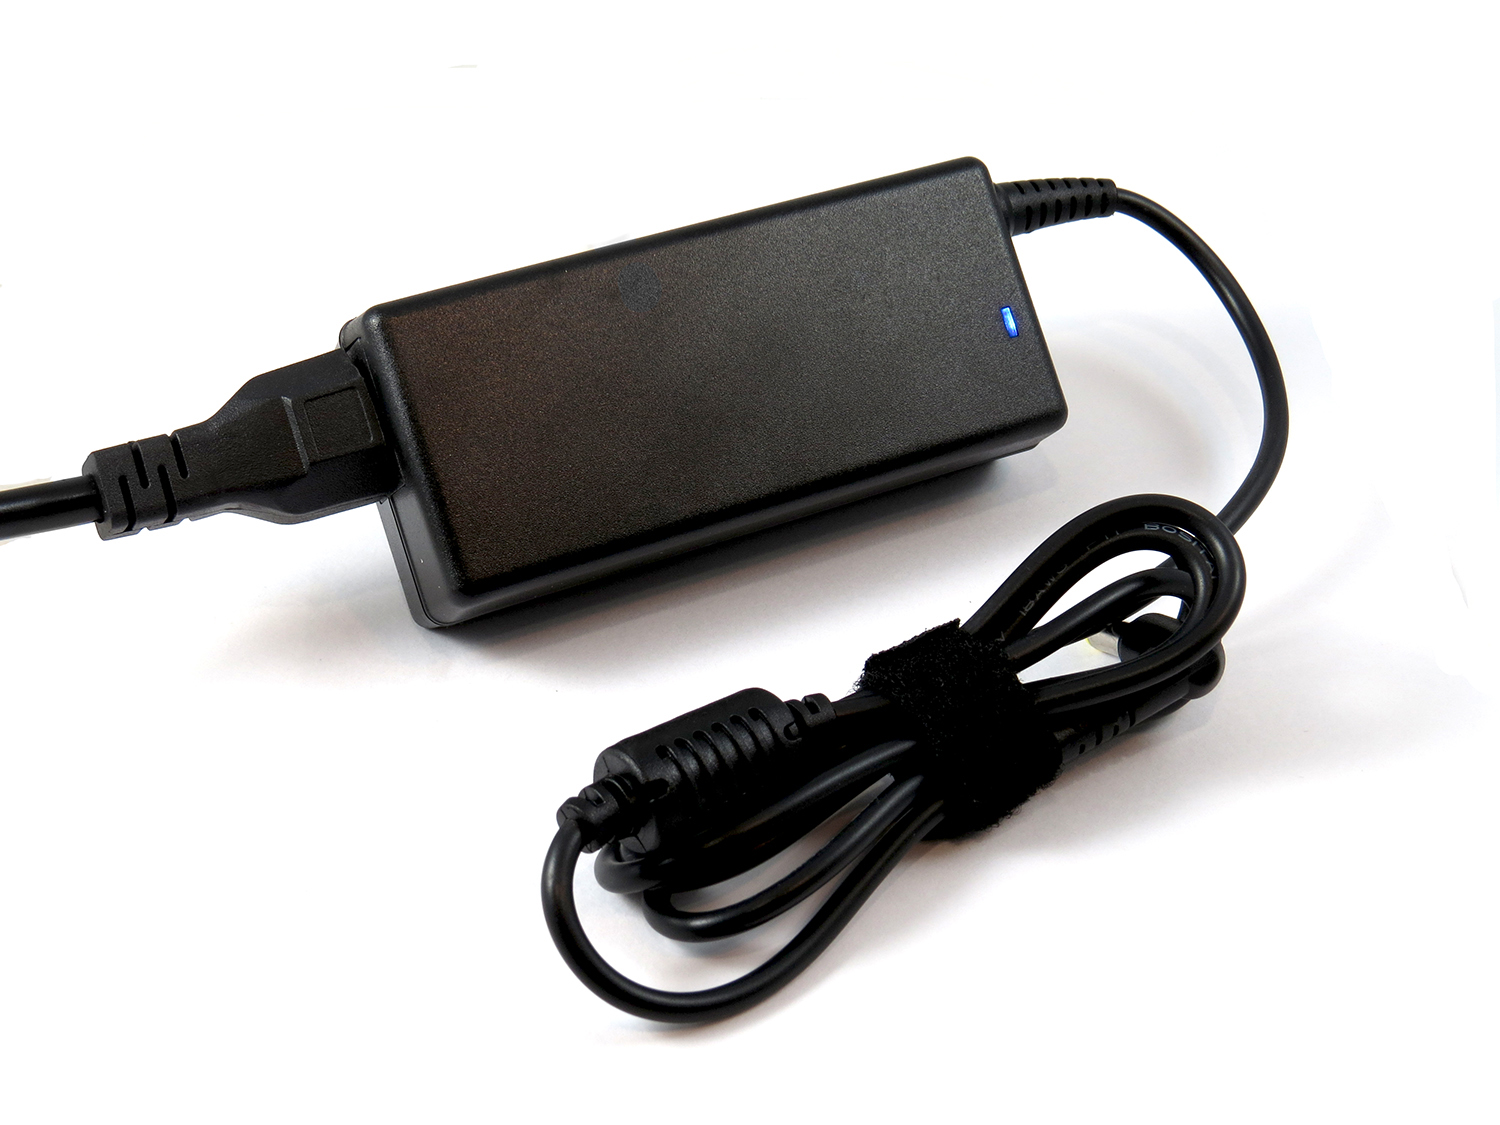 Ac Adapter for Samsung Sadp-90fh B Ad-9019s - image 2 of 3